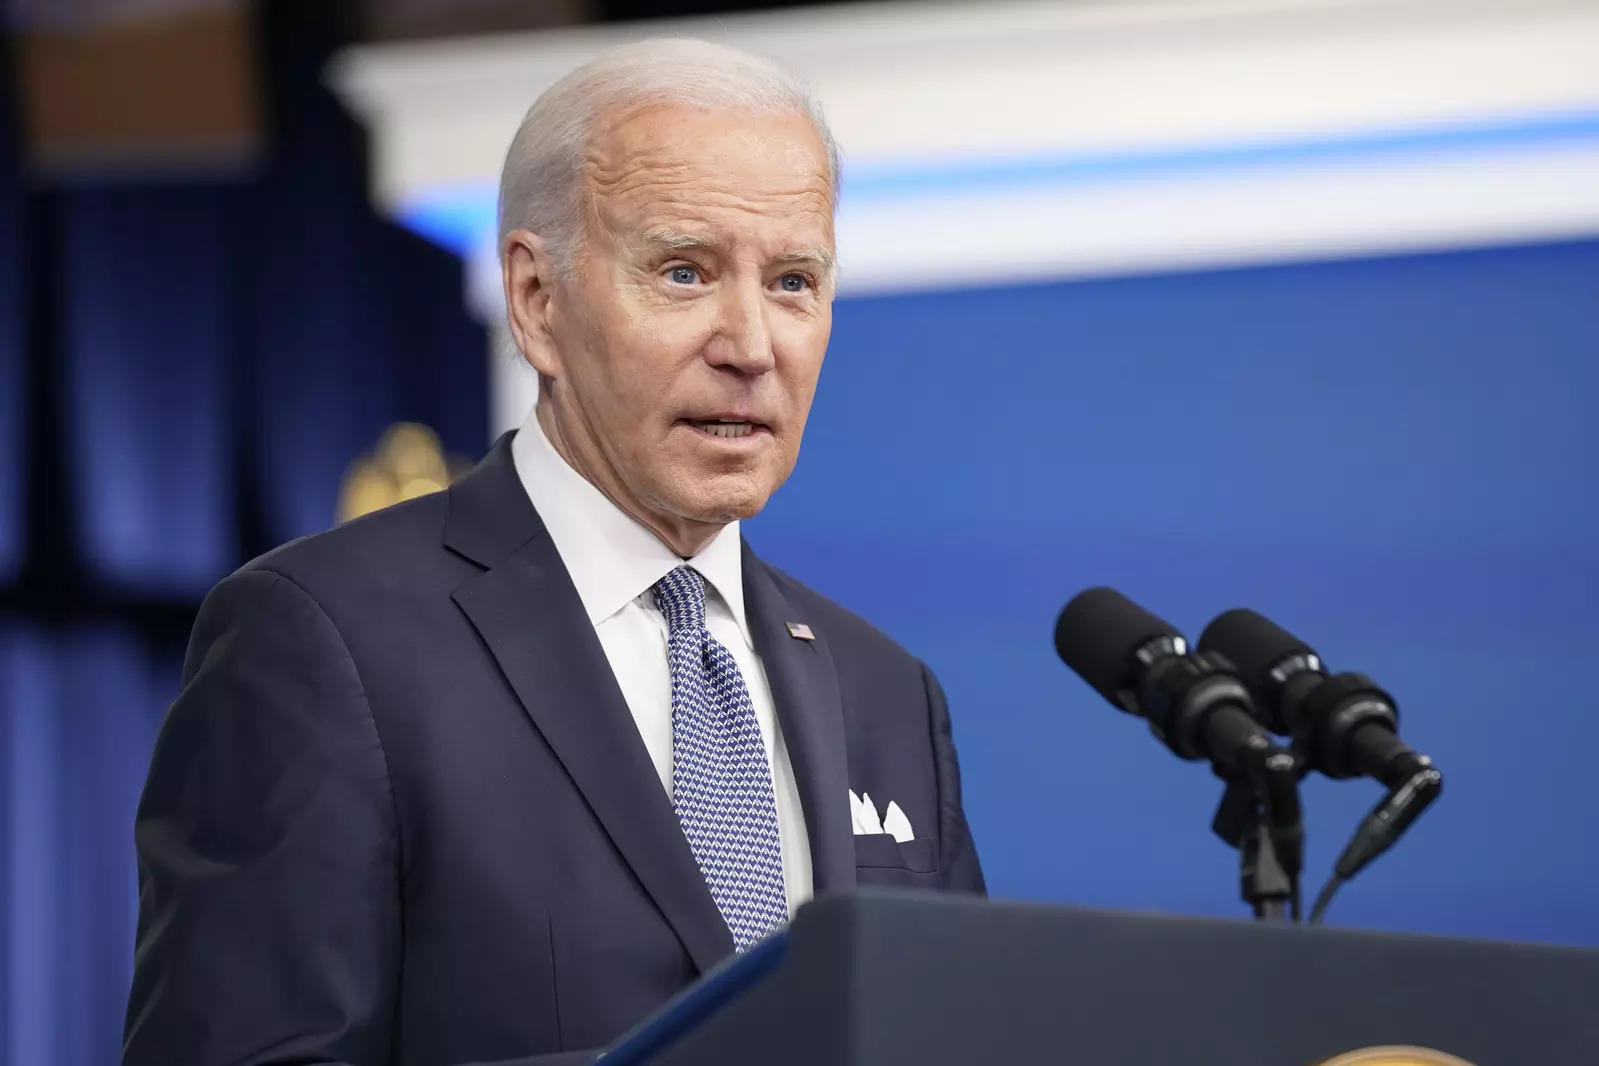 Lawyers found more classified documents at Joe Biden's home